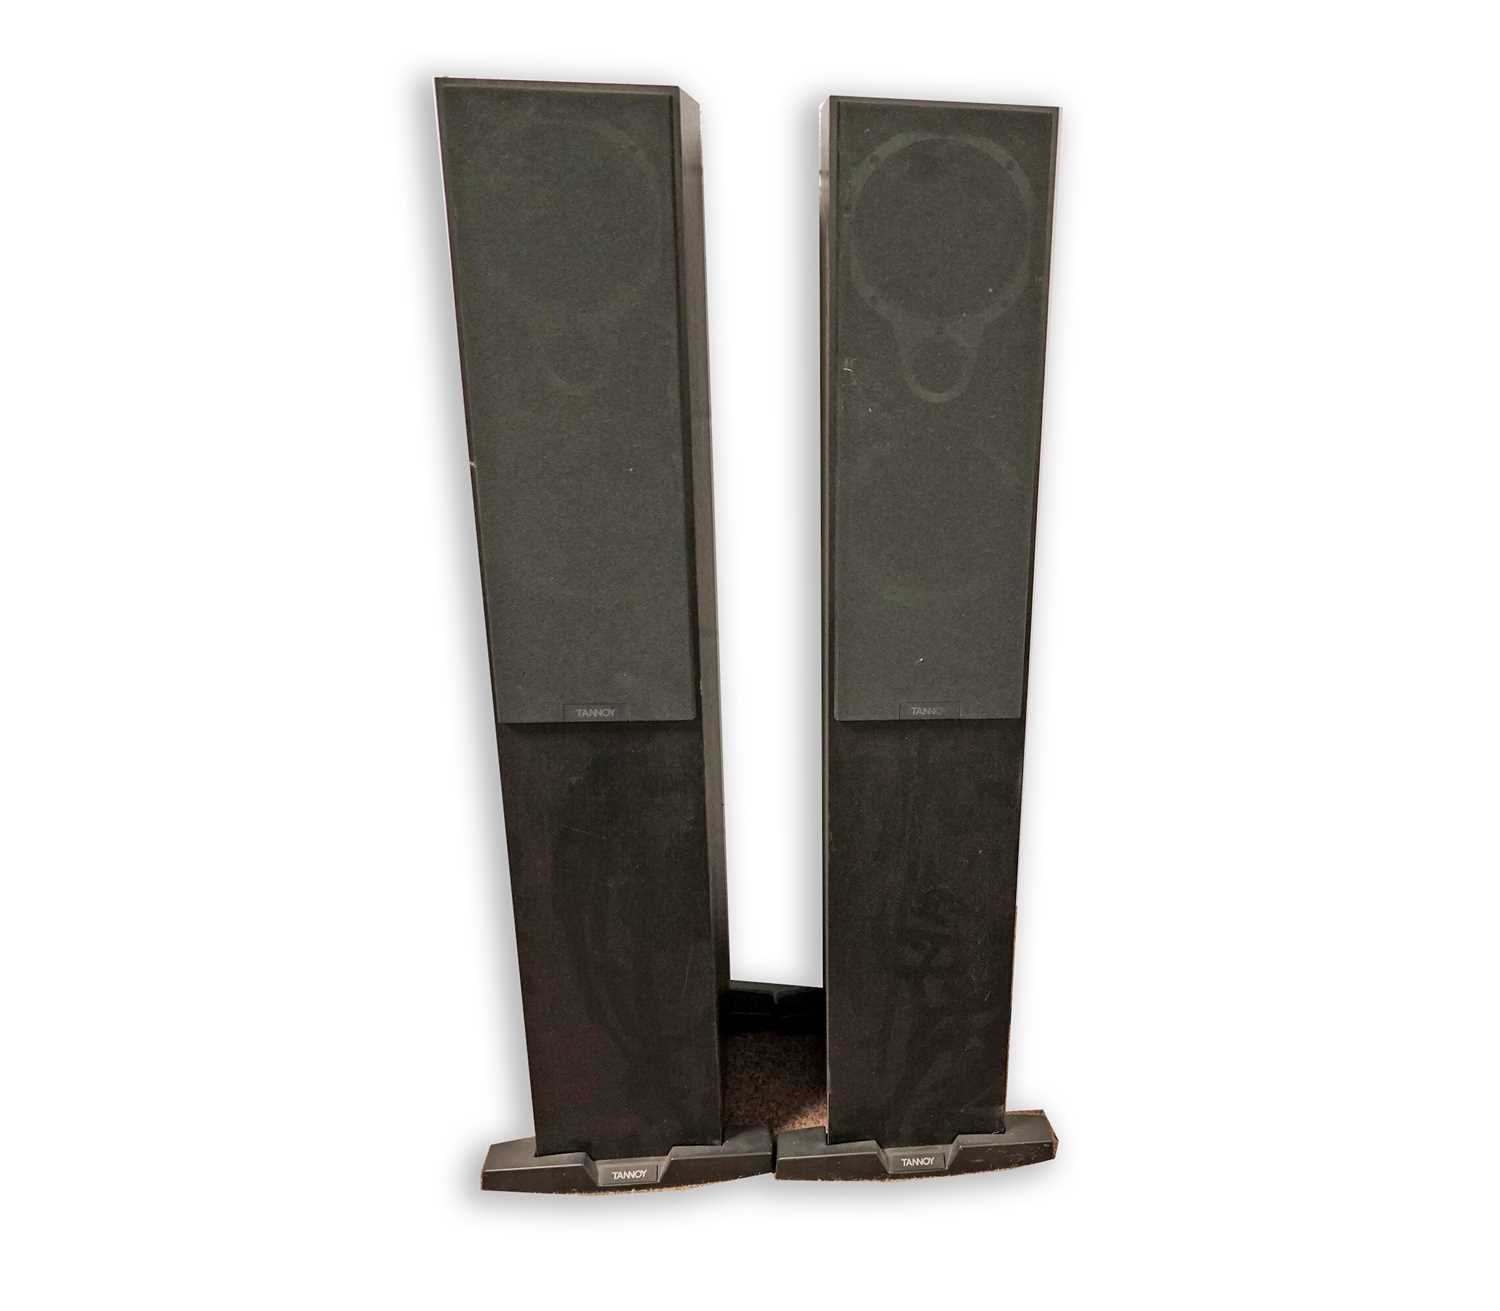 Lot 77 - A pair of Tannoy Eclipse 3 floor-standing speakers